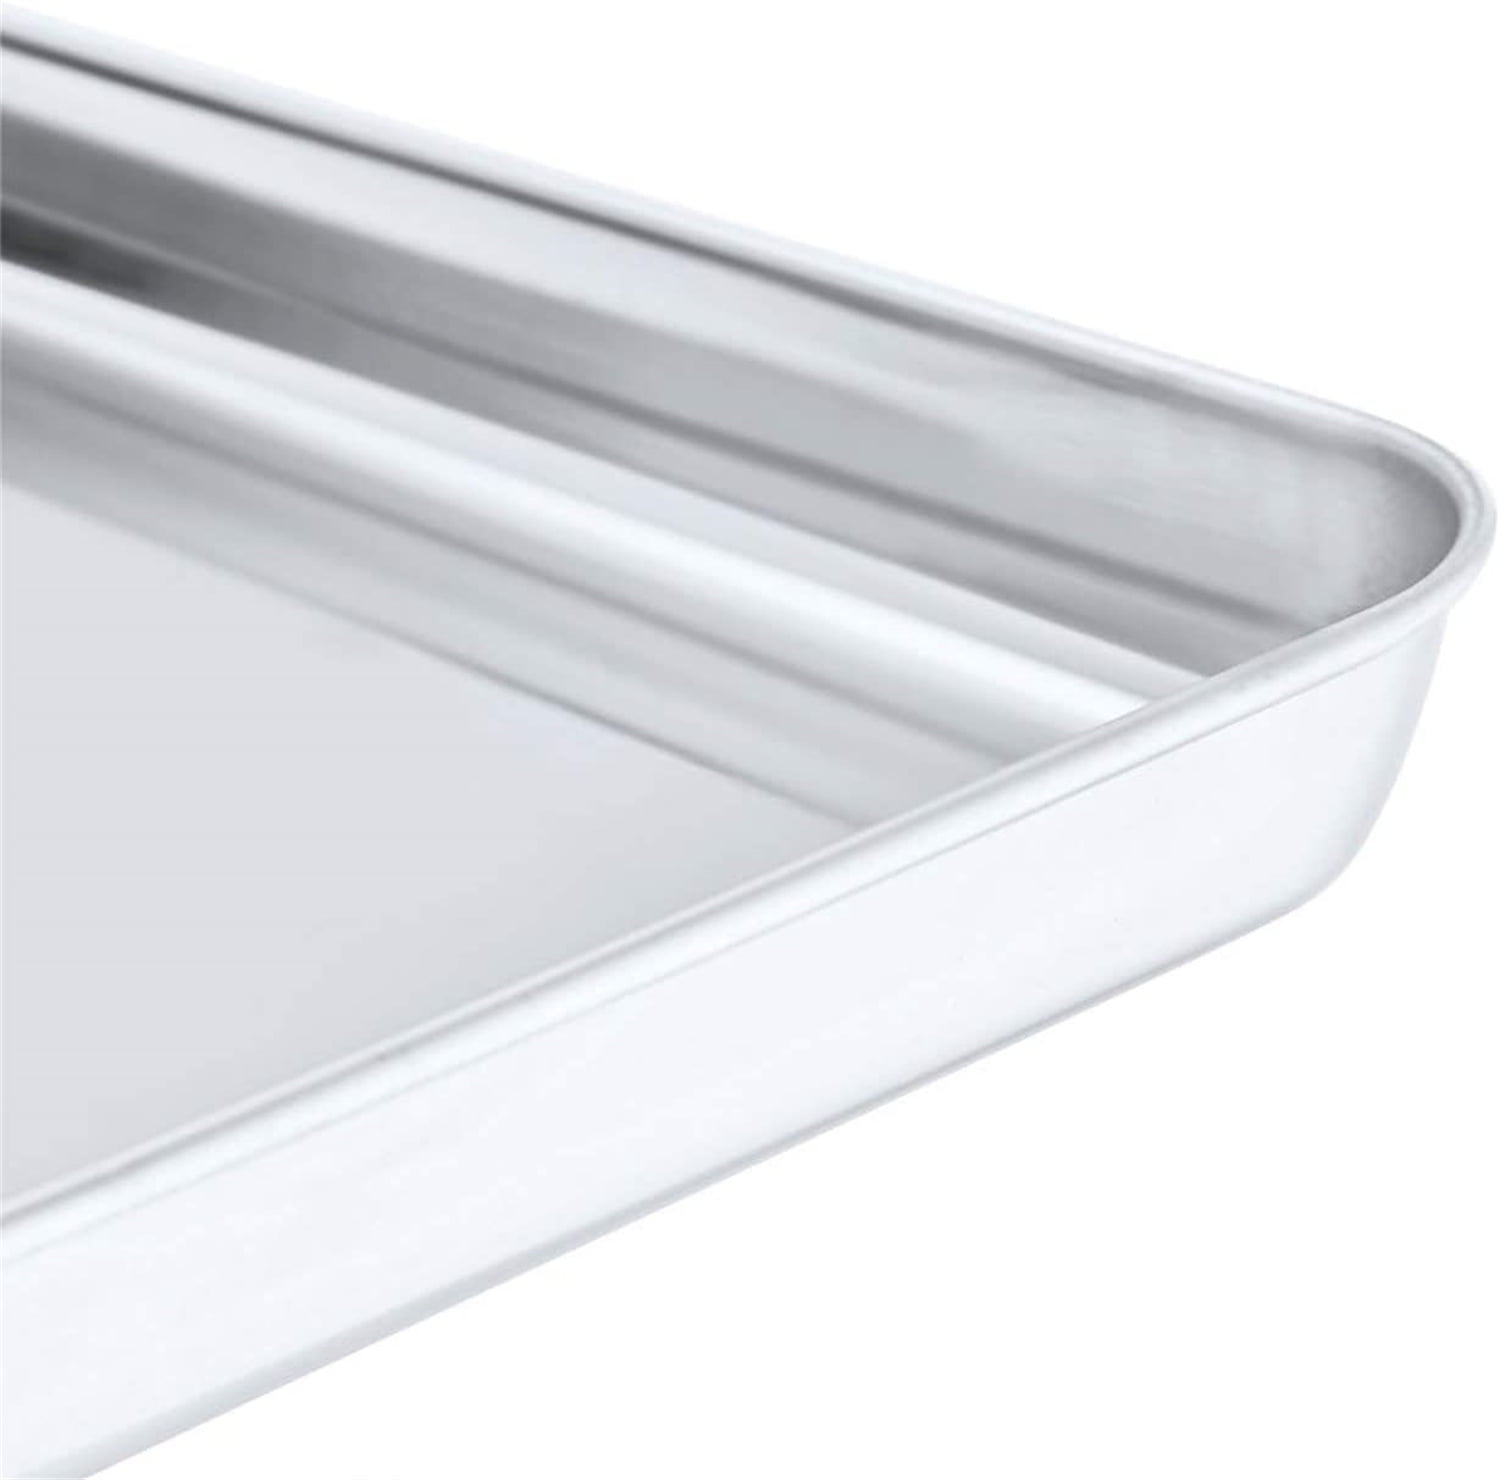 Casewin Baking Sheet Stainless Steel Baking Tray Cookie Sheet Oven